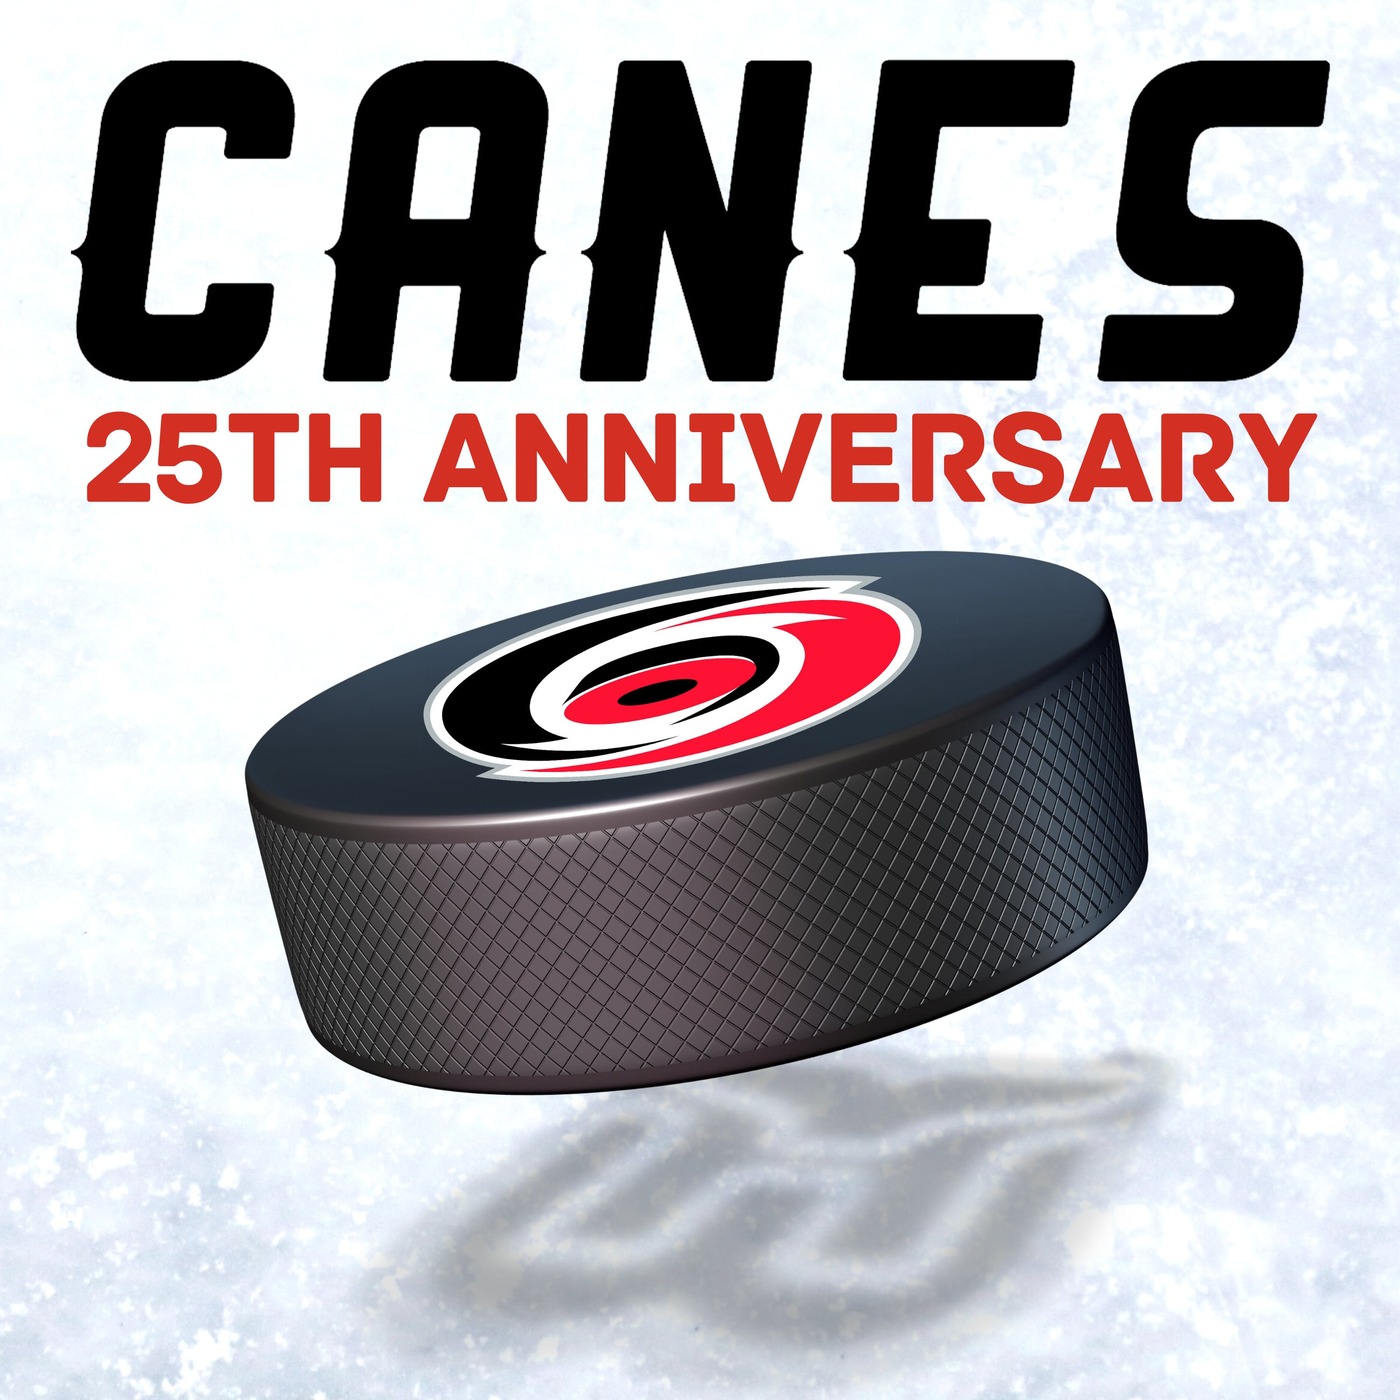 E2 Canes 25th Anniversary: The charm and curse of Hartford